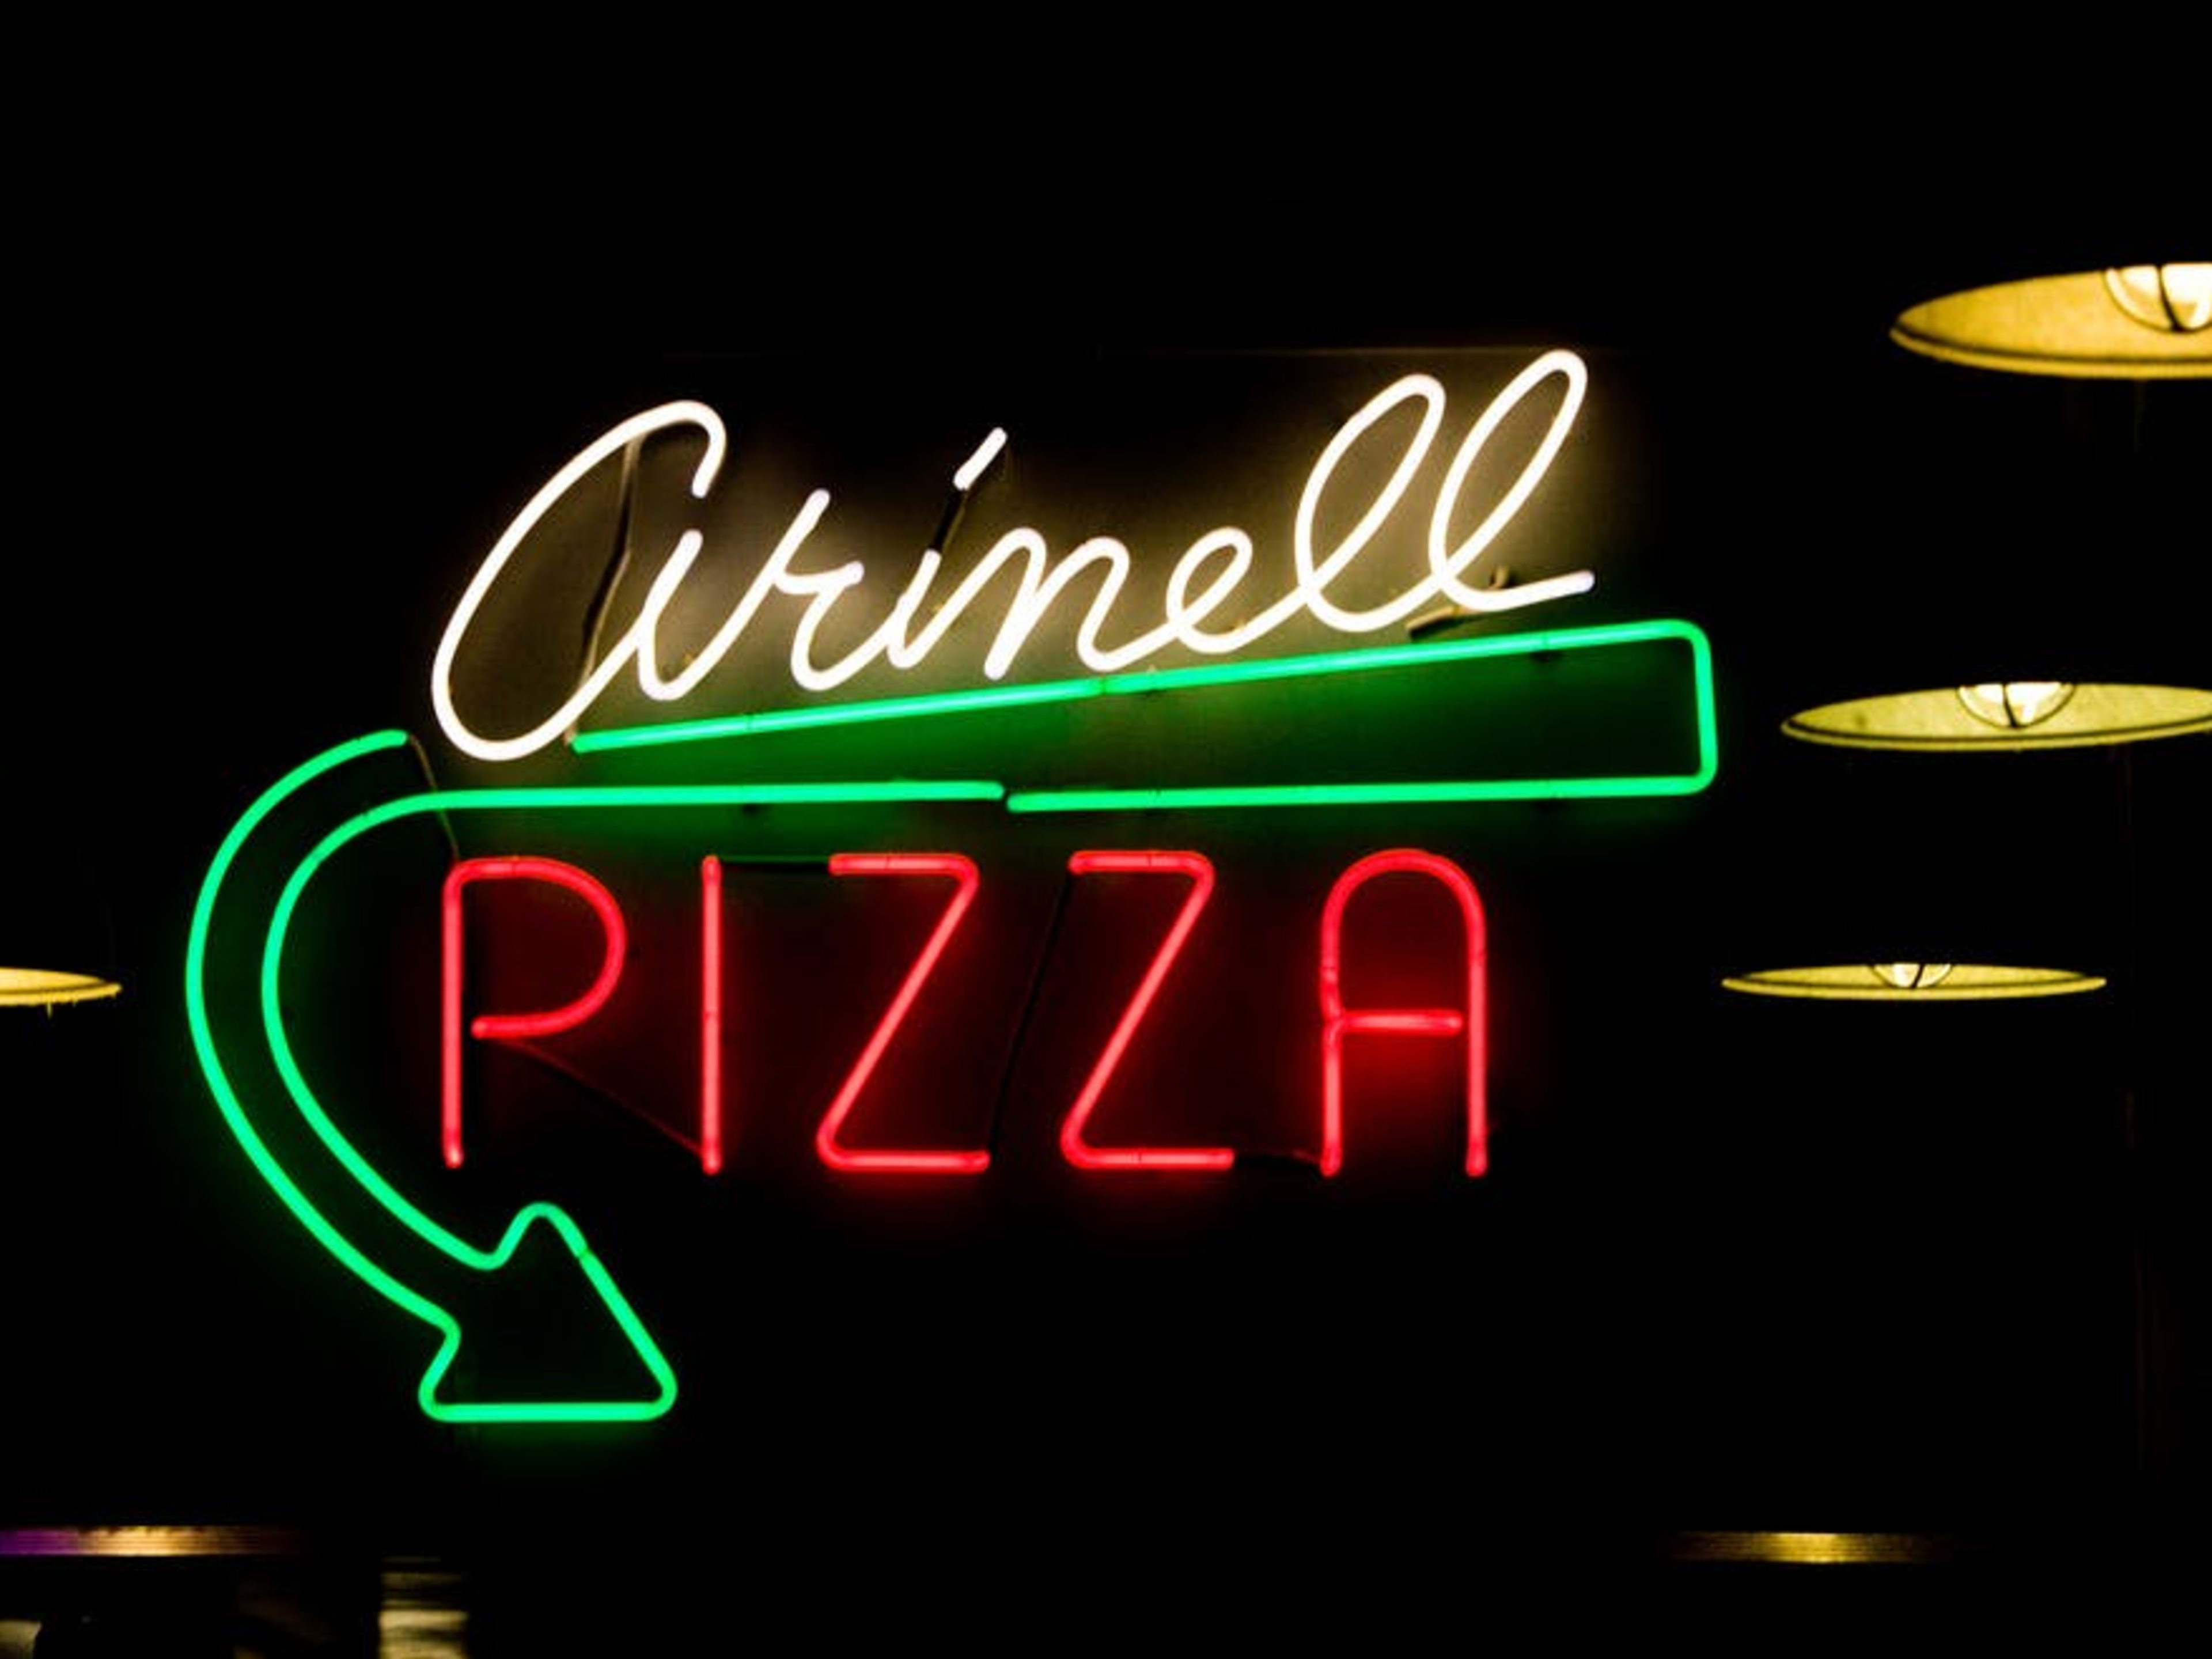 Arinell Pizza image